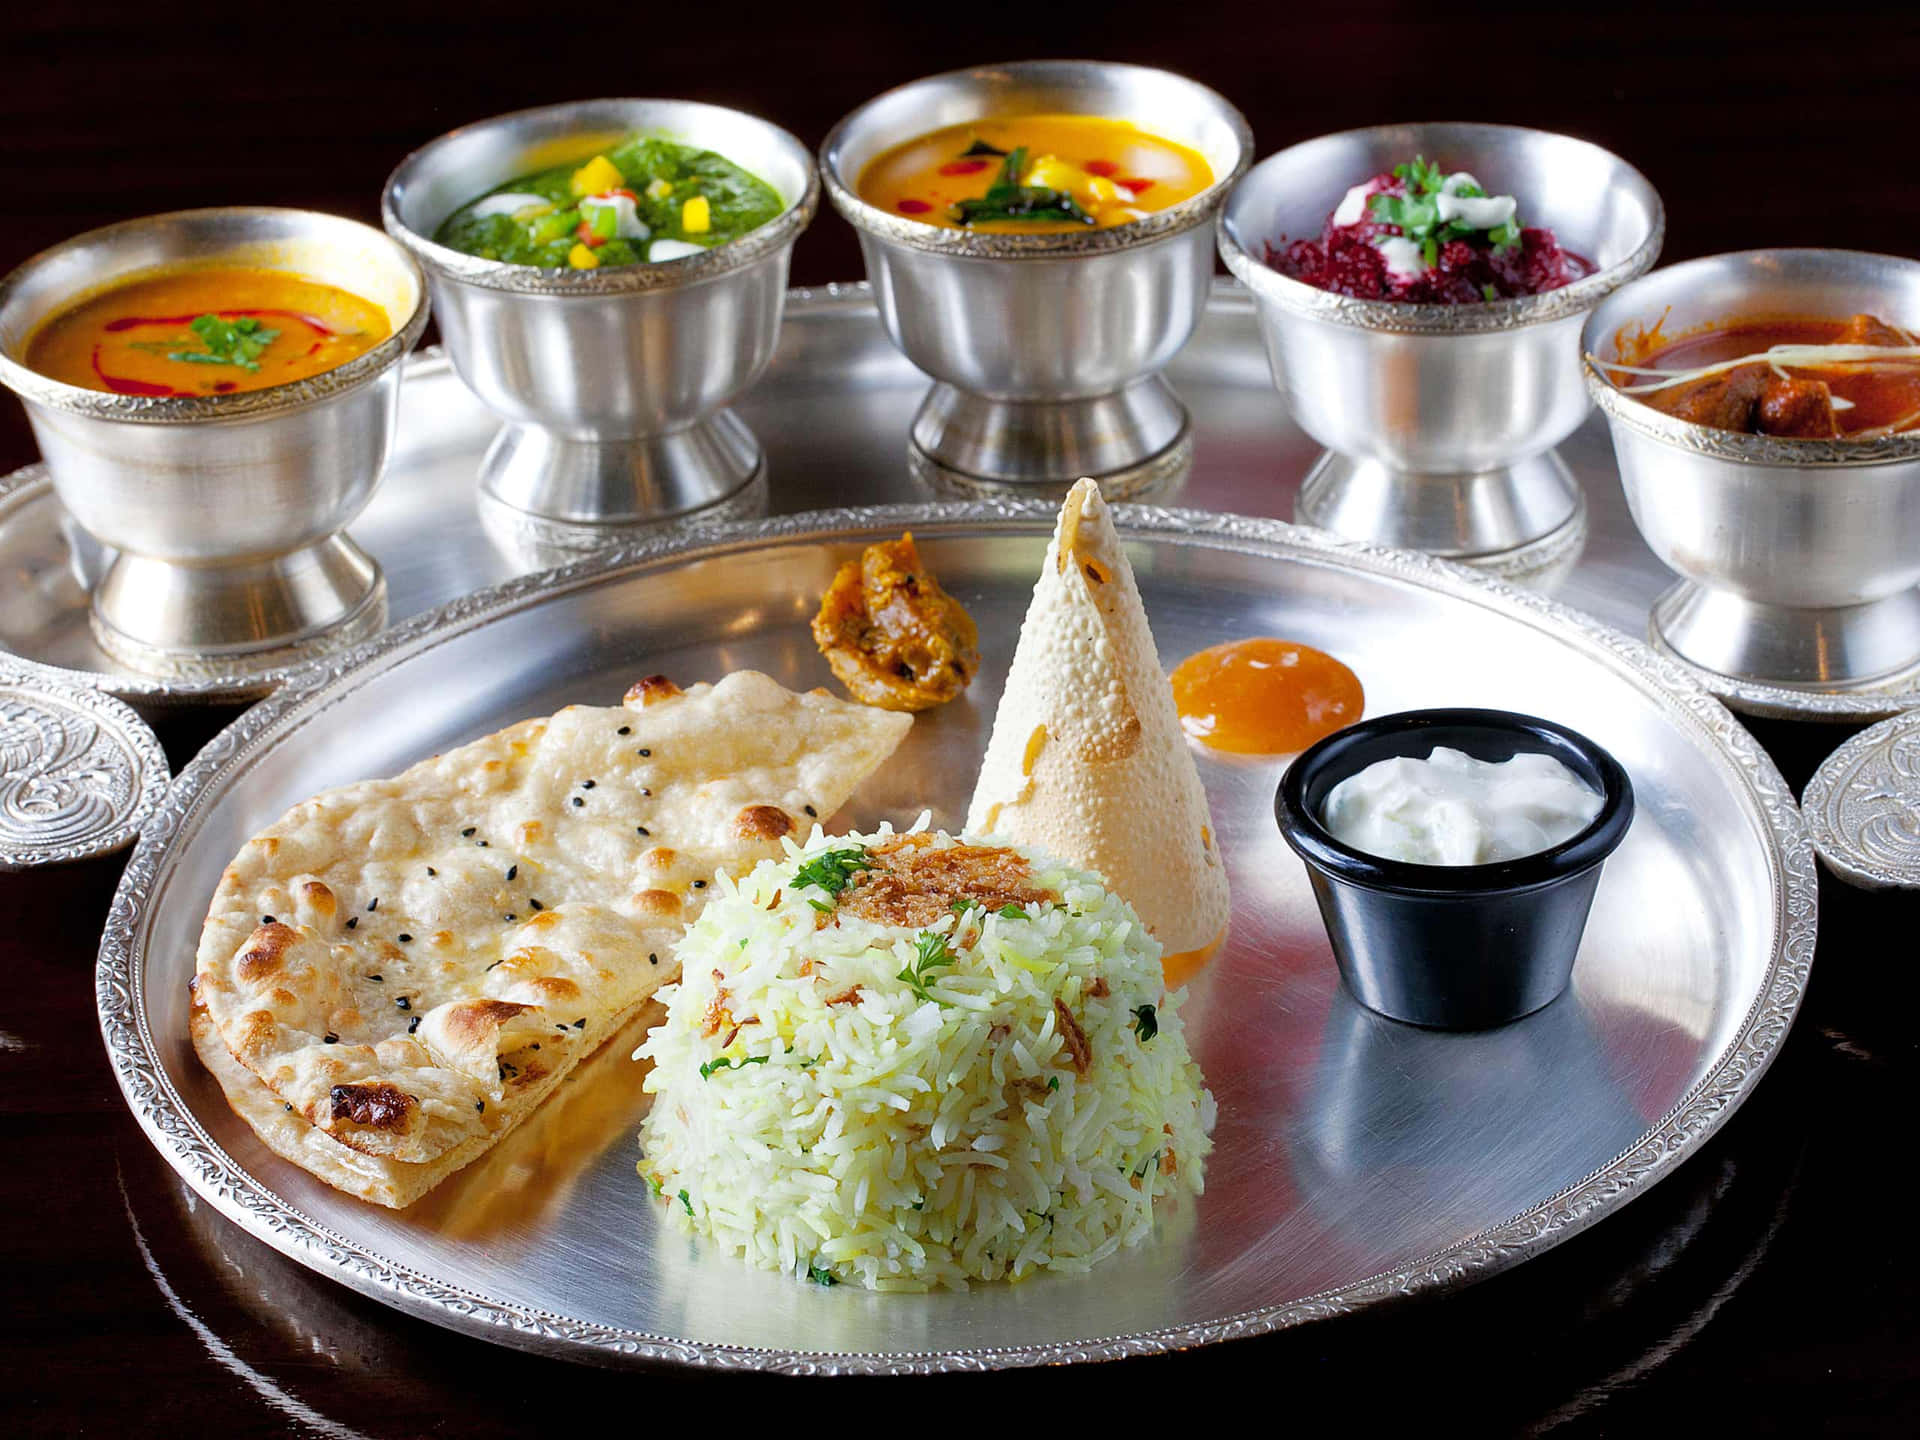 A colorful assortment of Indian food dishes, bursting with flavor and tradition